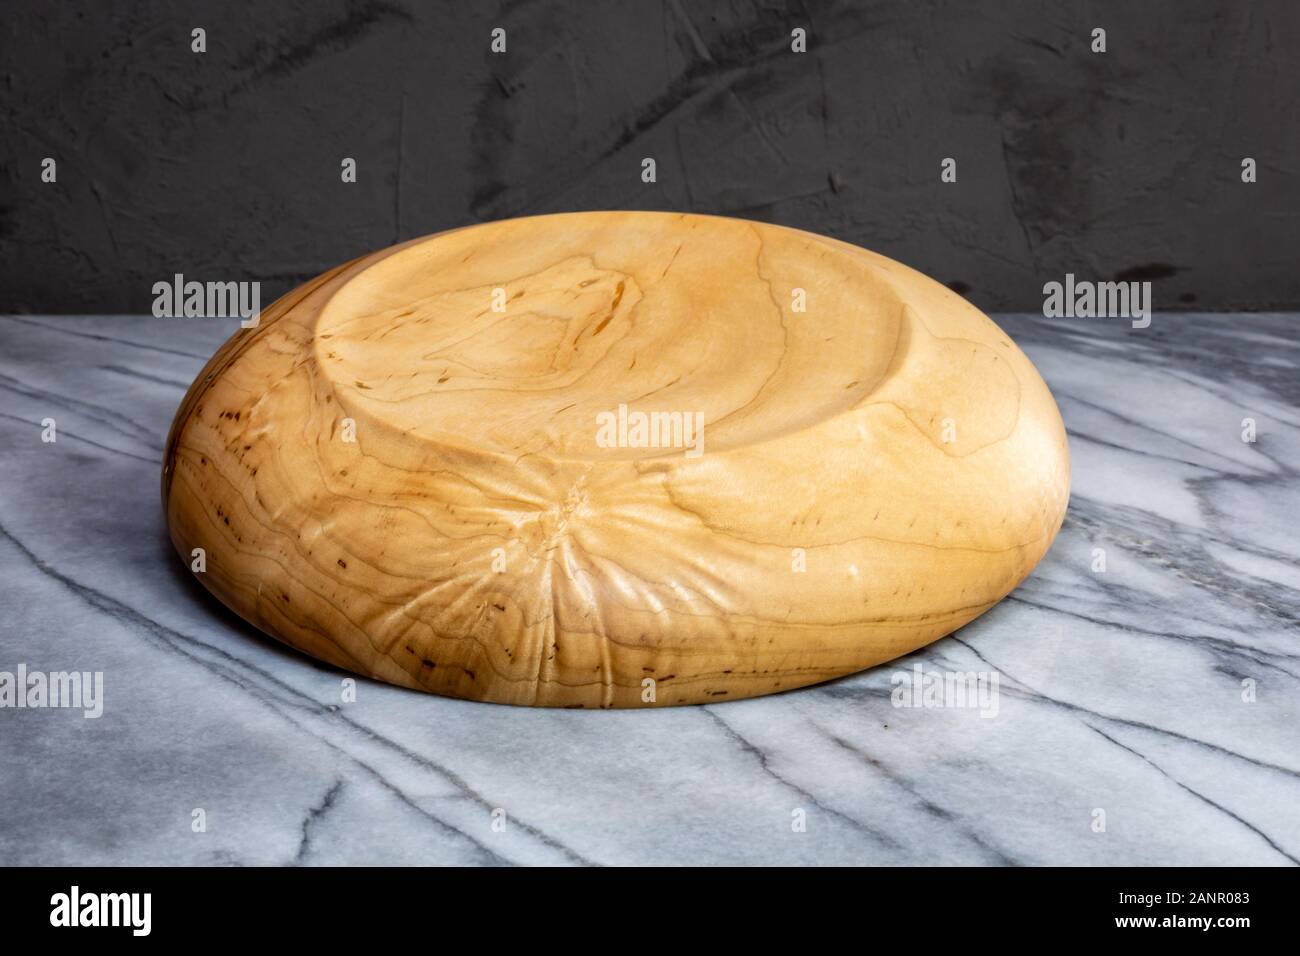 Wormy maple wood nut bowl or serving bowl hand turned kitchen decor Stock Photo